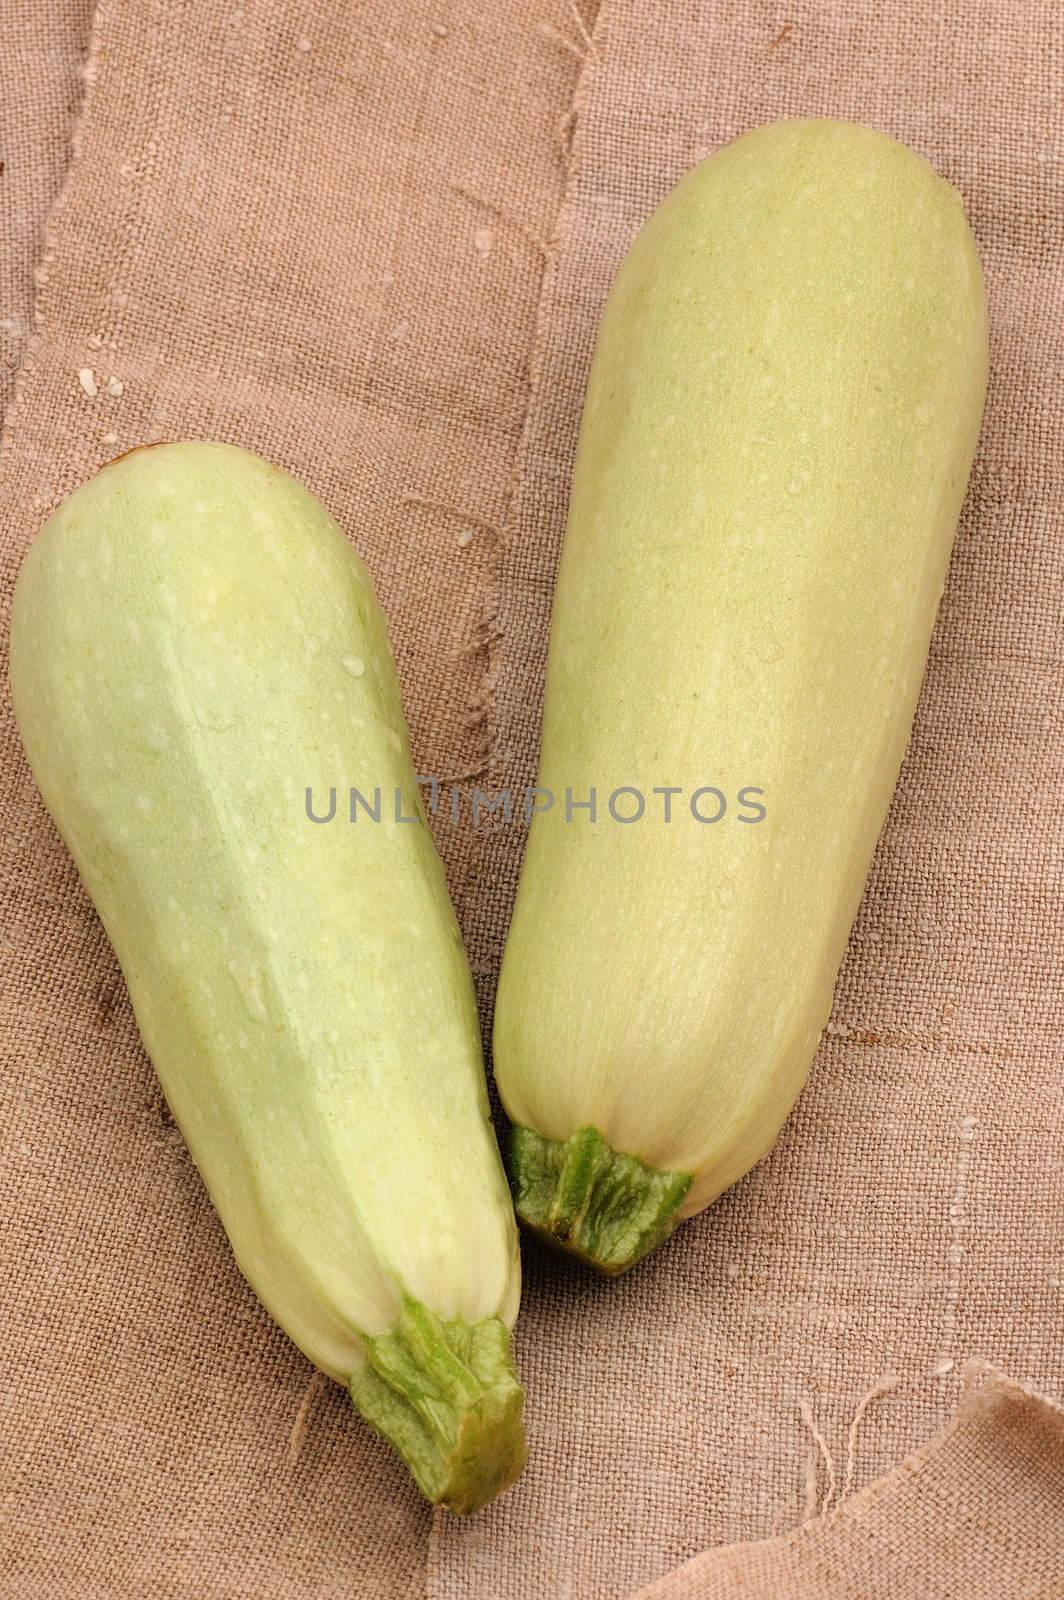 Some vegetable marrows on the table